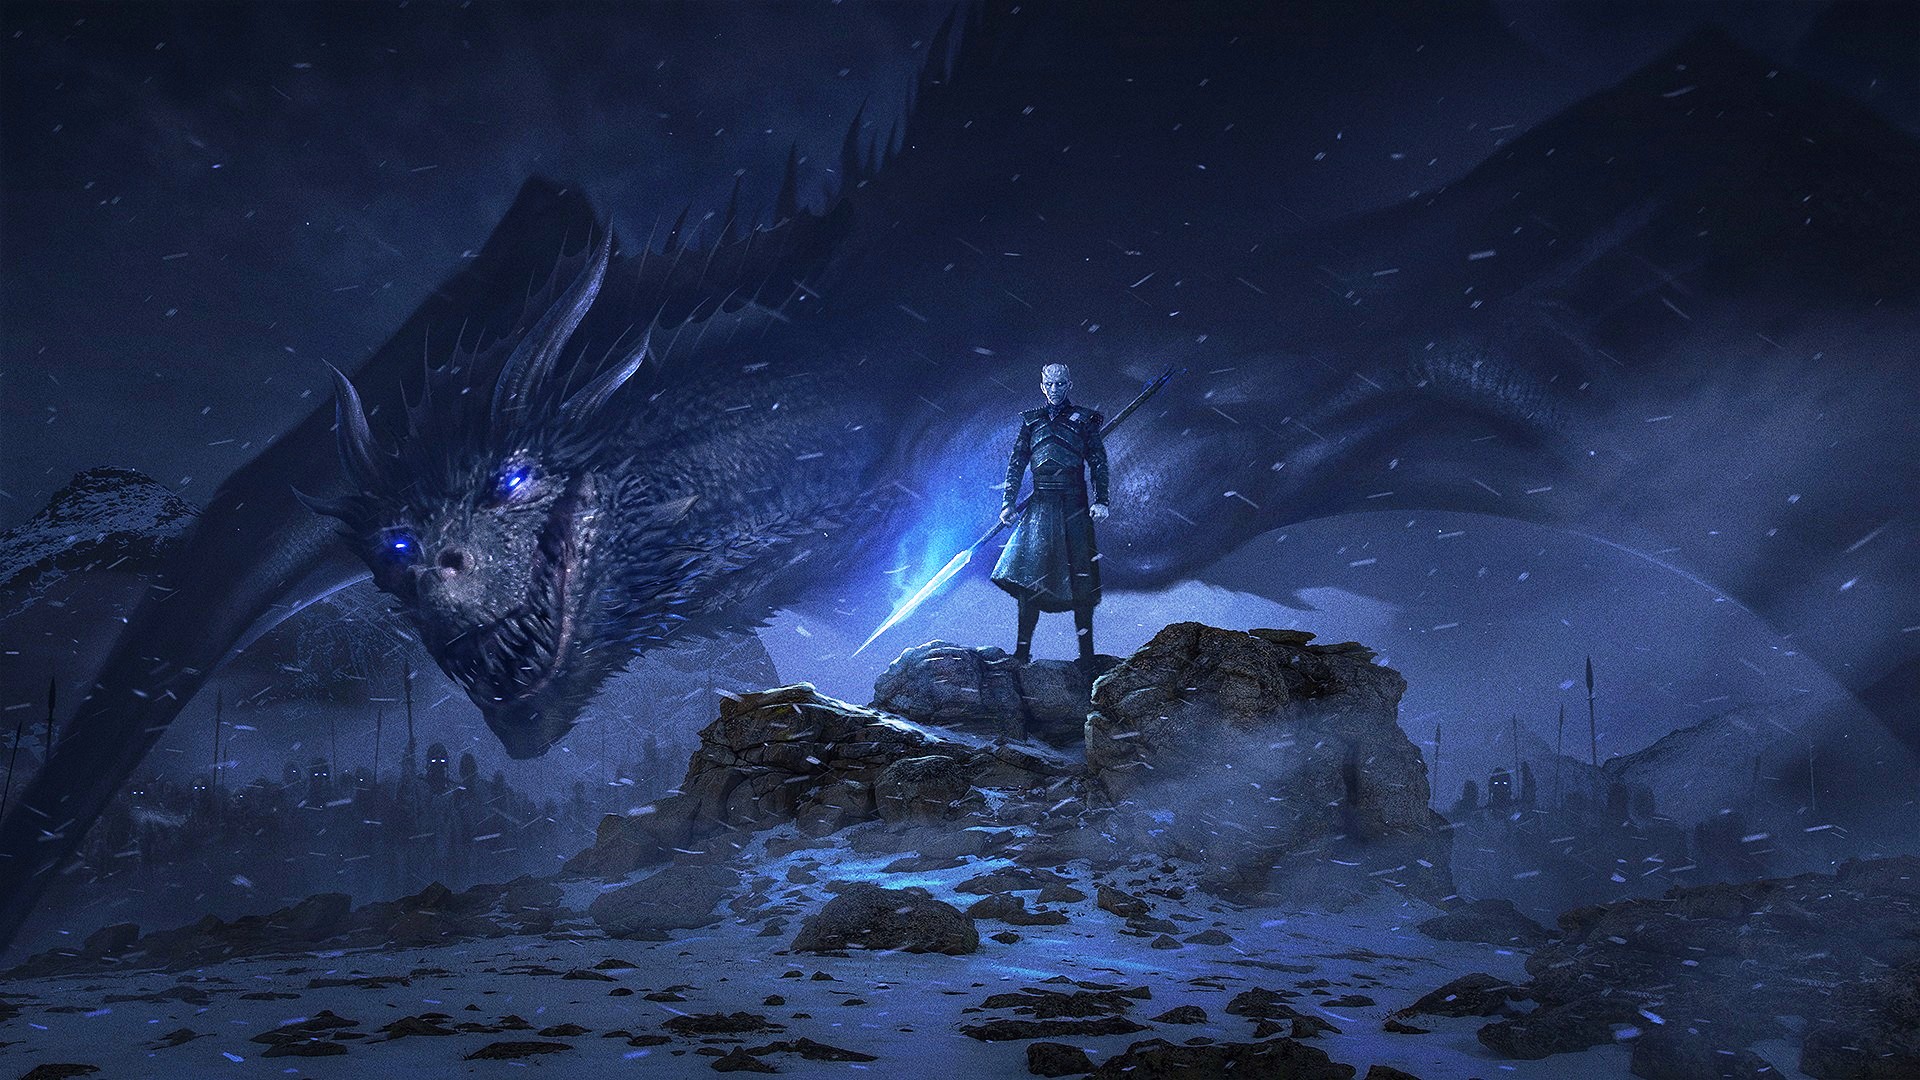 Game of Thrones 8 Season Wallpaper HD with high-resolution 1920x1080 pixel. You can use this poster wallpaper for your Desktop Computers, Mac Screensavers, Windows Backgrounds, iPhone Wallpapers, Tablet or Android Lock screen and another Mobile device